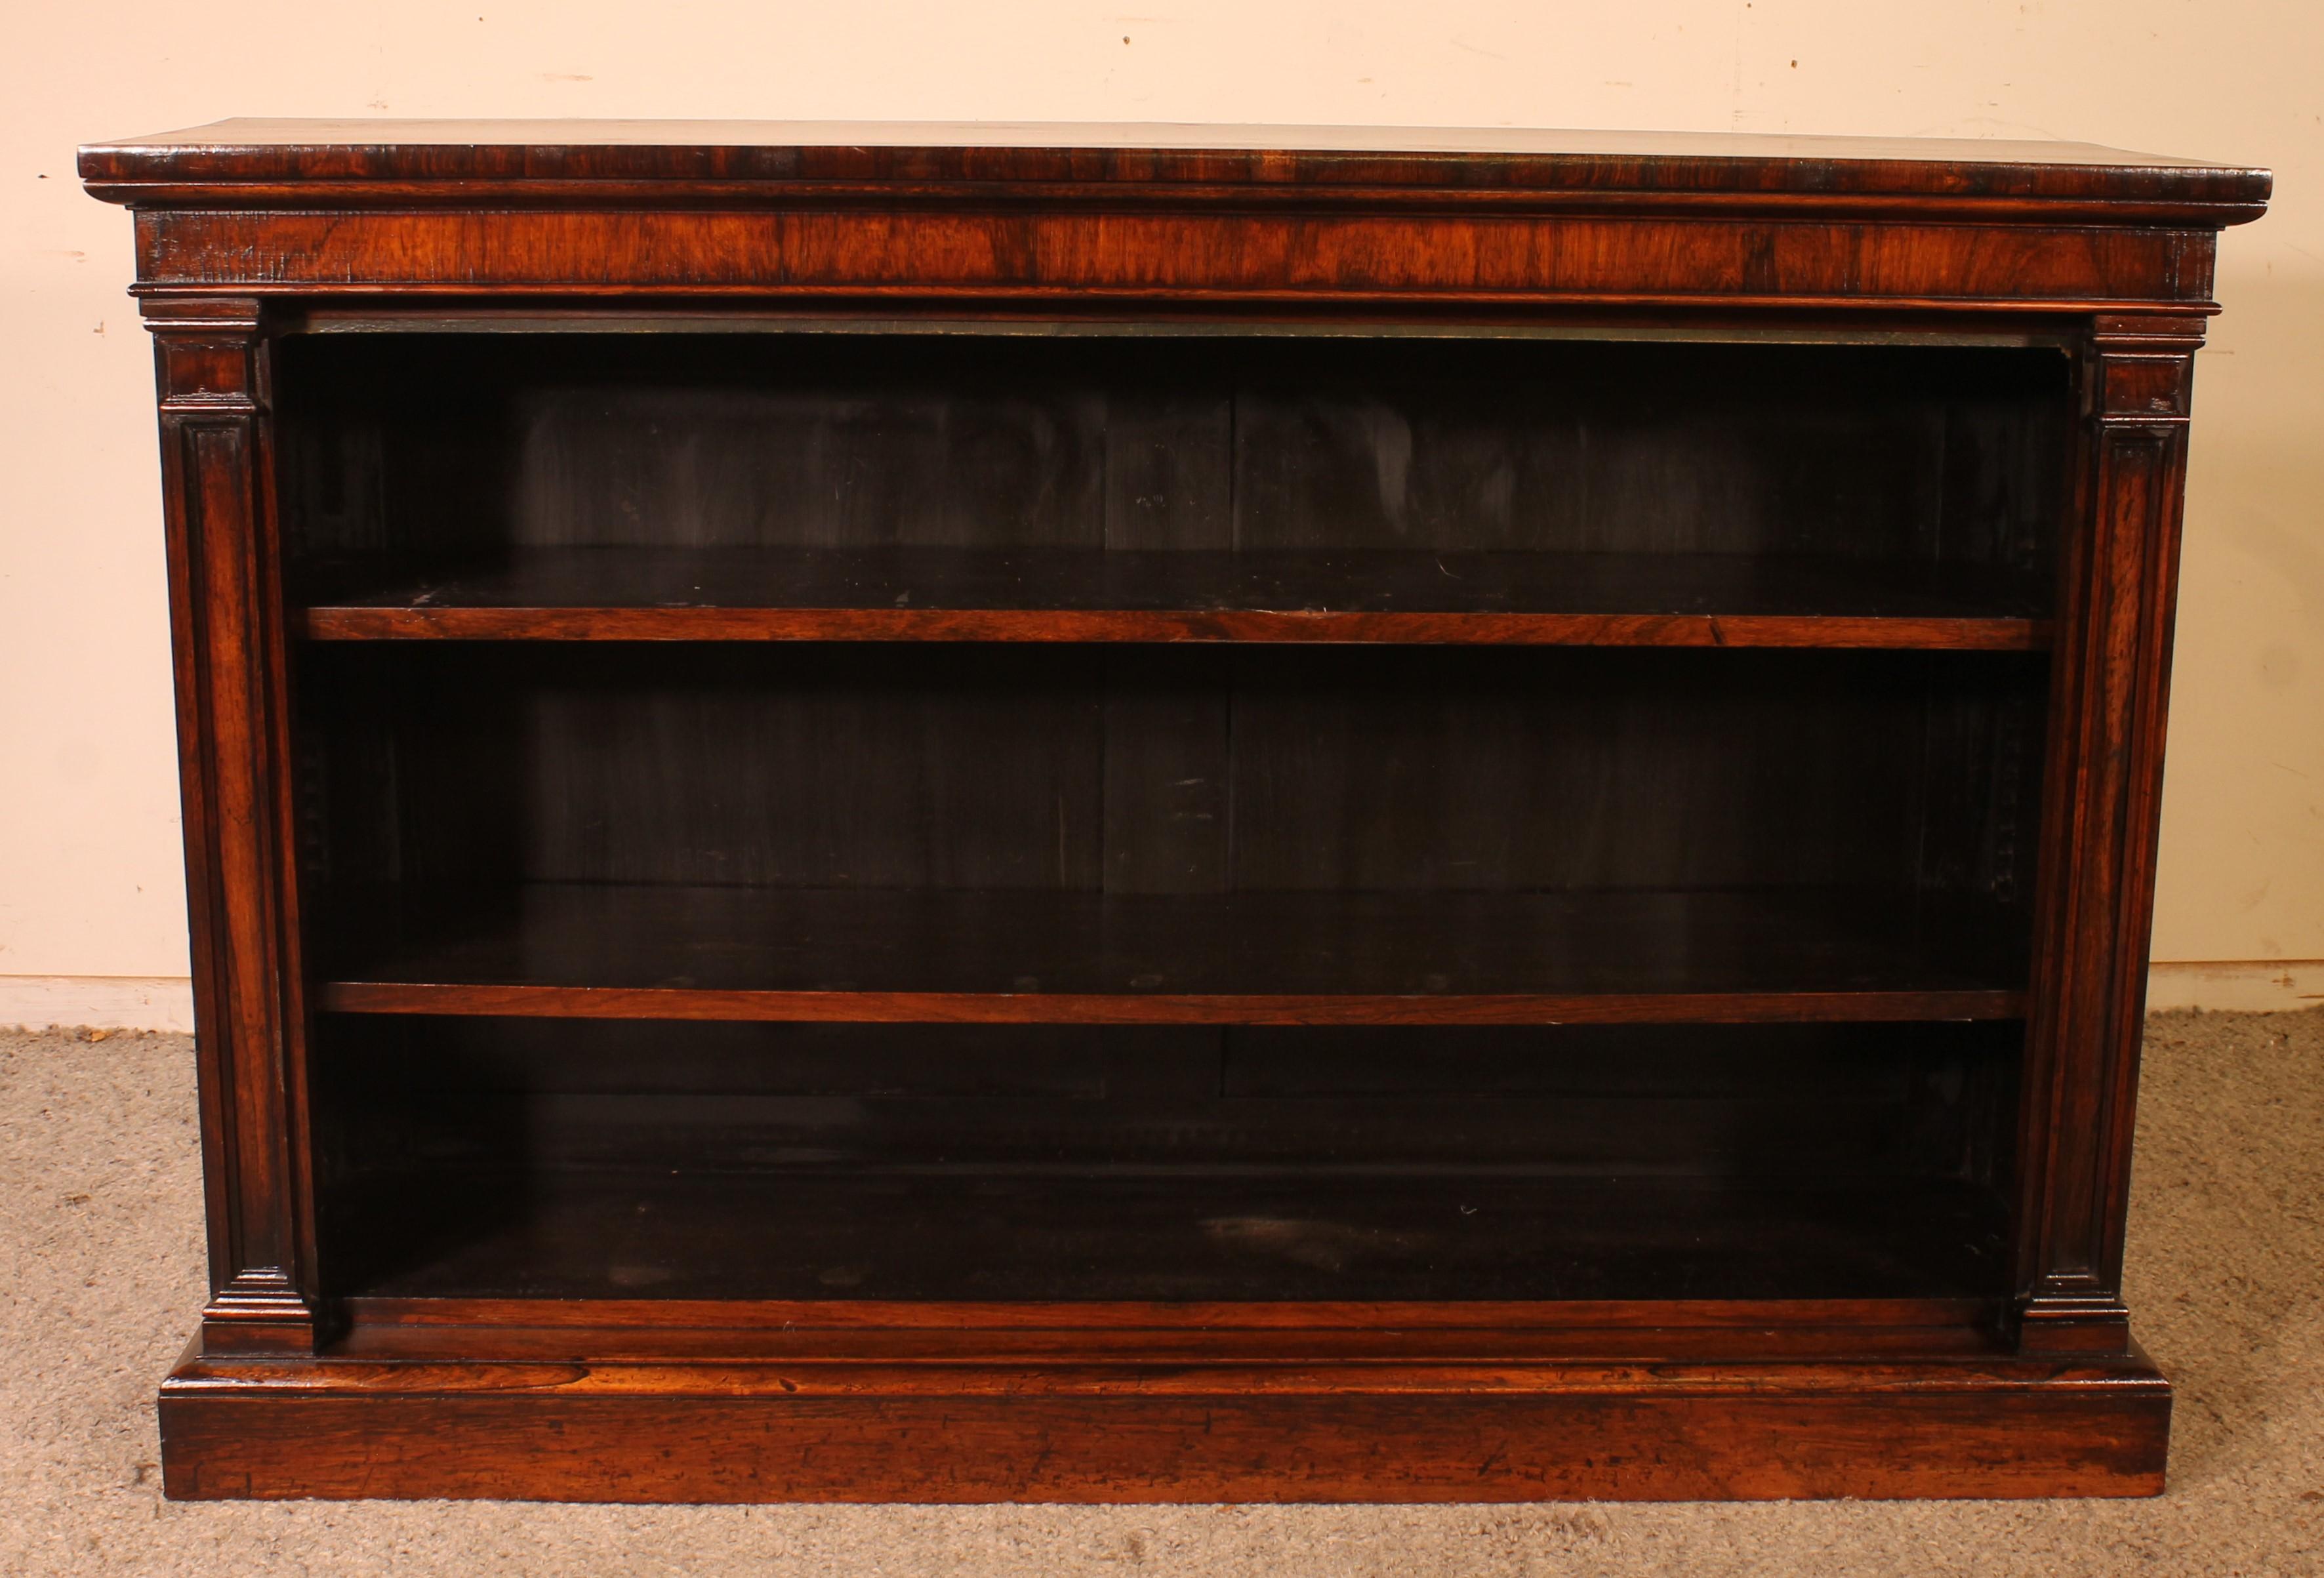 Large open bookcase in rosewood Regency period, circa 1800

It is rare to find a bookcase in rosewood that is of the beginning of the 19th century and of such a large size
Beautiful proportions and two uprights decorated with carvings

Original